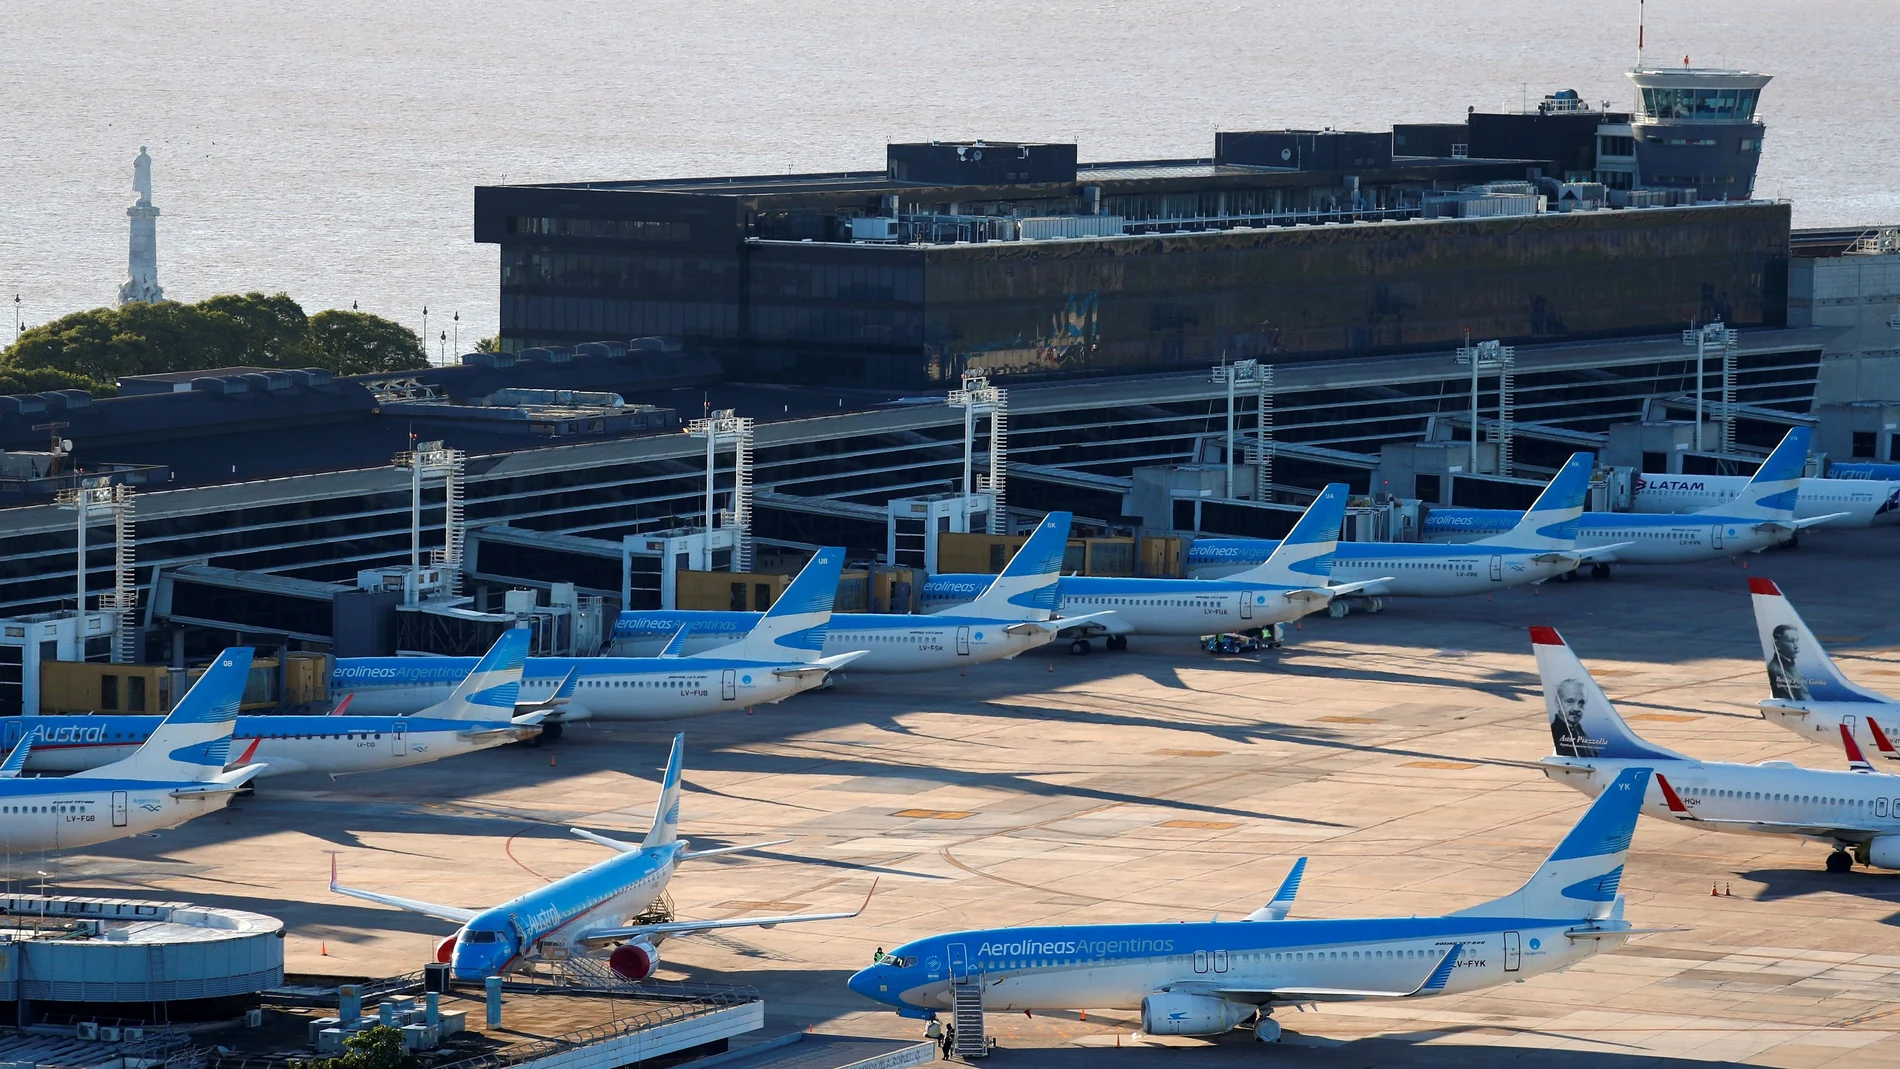 FILE PHOTO: Airplanes are seen parked at Jorge Newbery domestic airport, as the spread of the coronavirus disease (COVID-19) continues, in Buenos Aires, Argentina April 29, 2020. REUTERS/Agustin Marcarian/File Photo